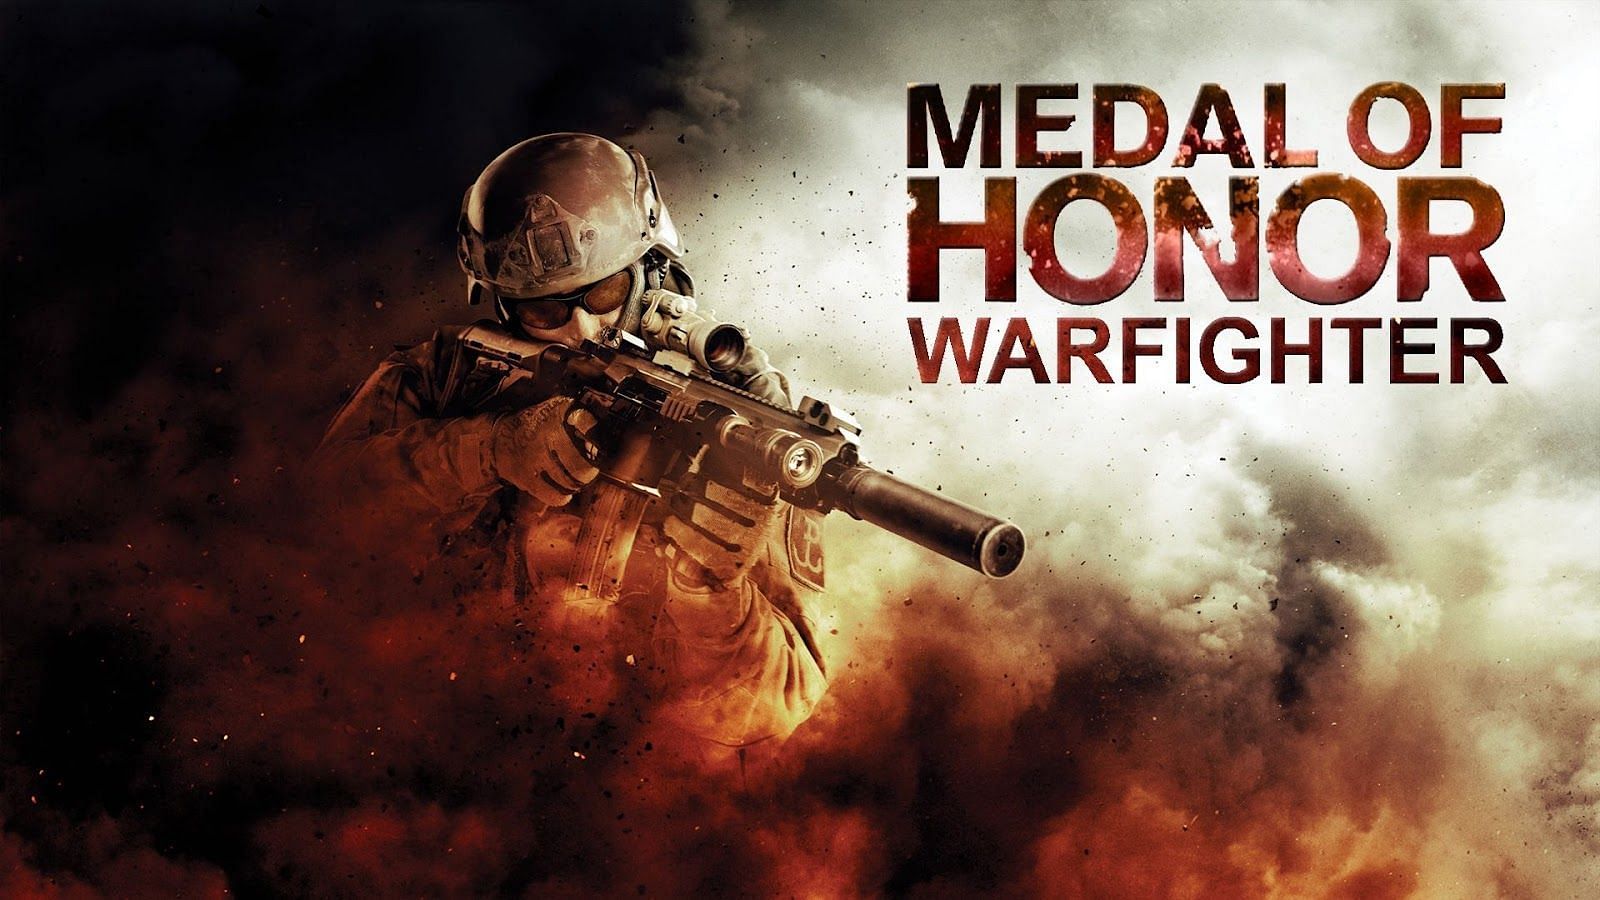 Cover image of Medal of Honor: Warfighter (Image via EA)